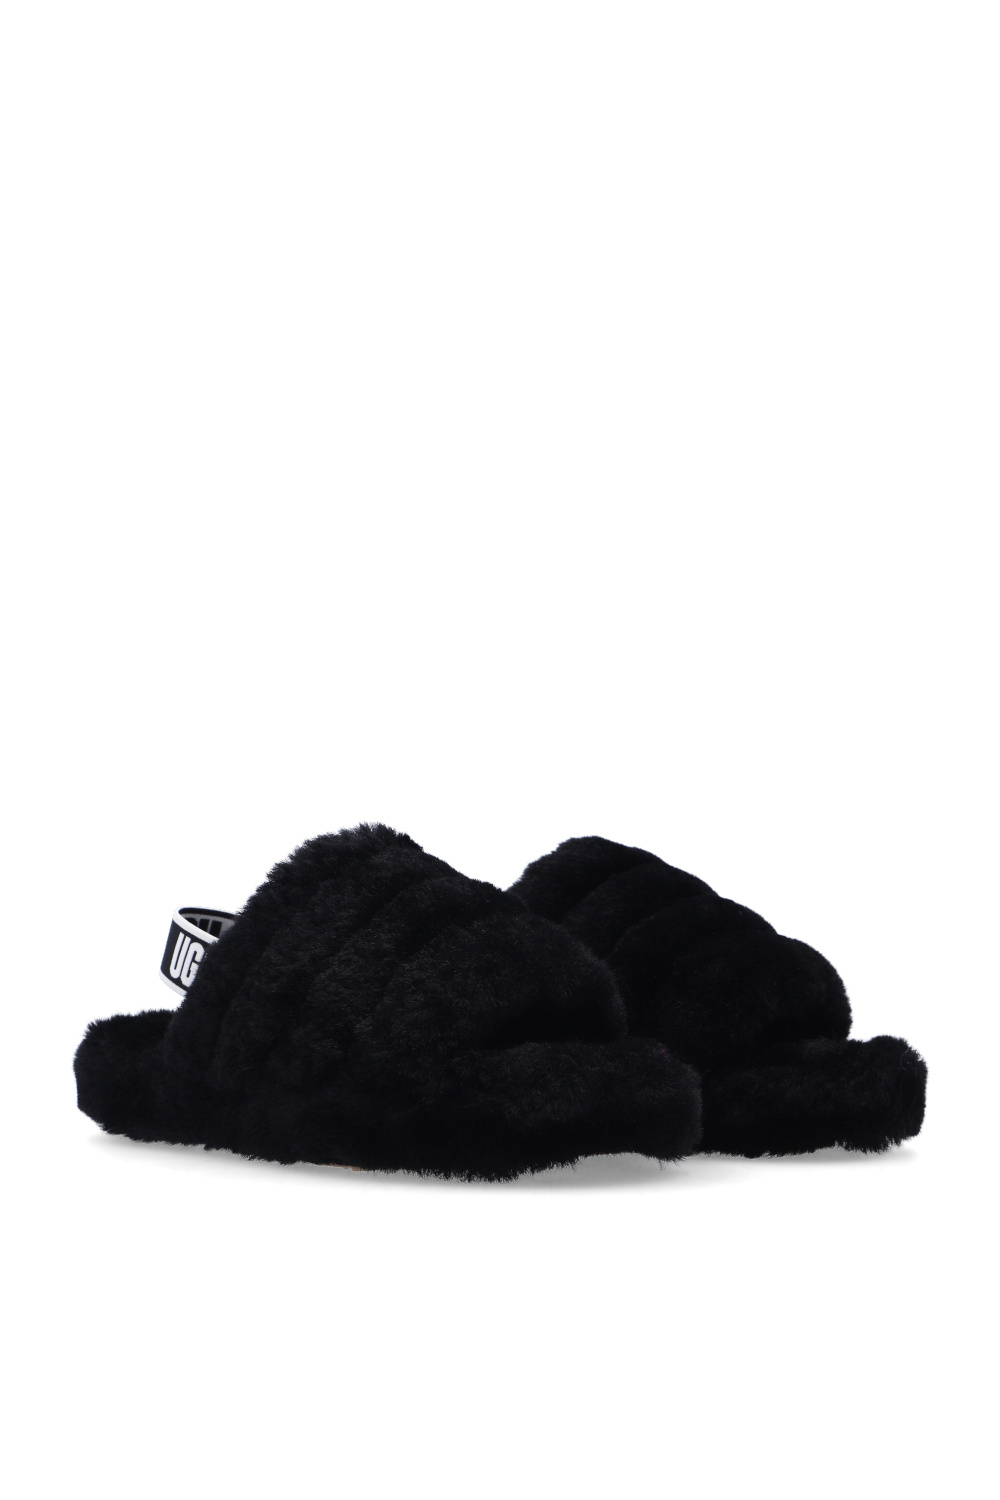 ugg Clth Kids ‘Fluff Yeah’ shearling sandals